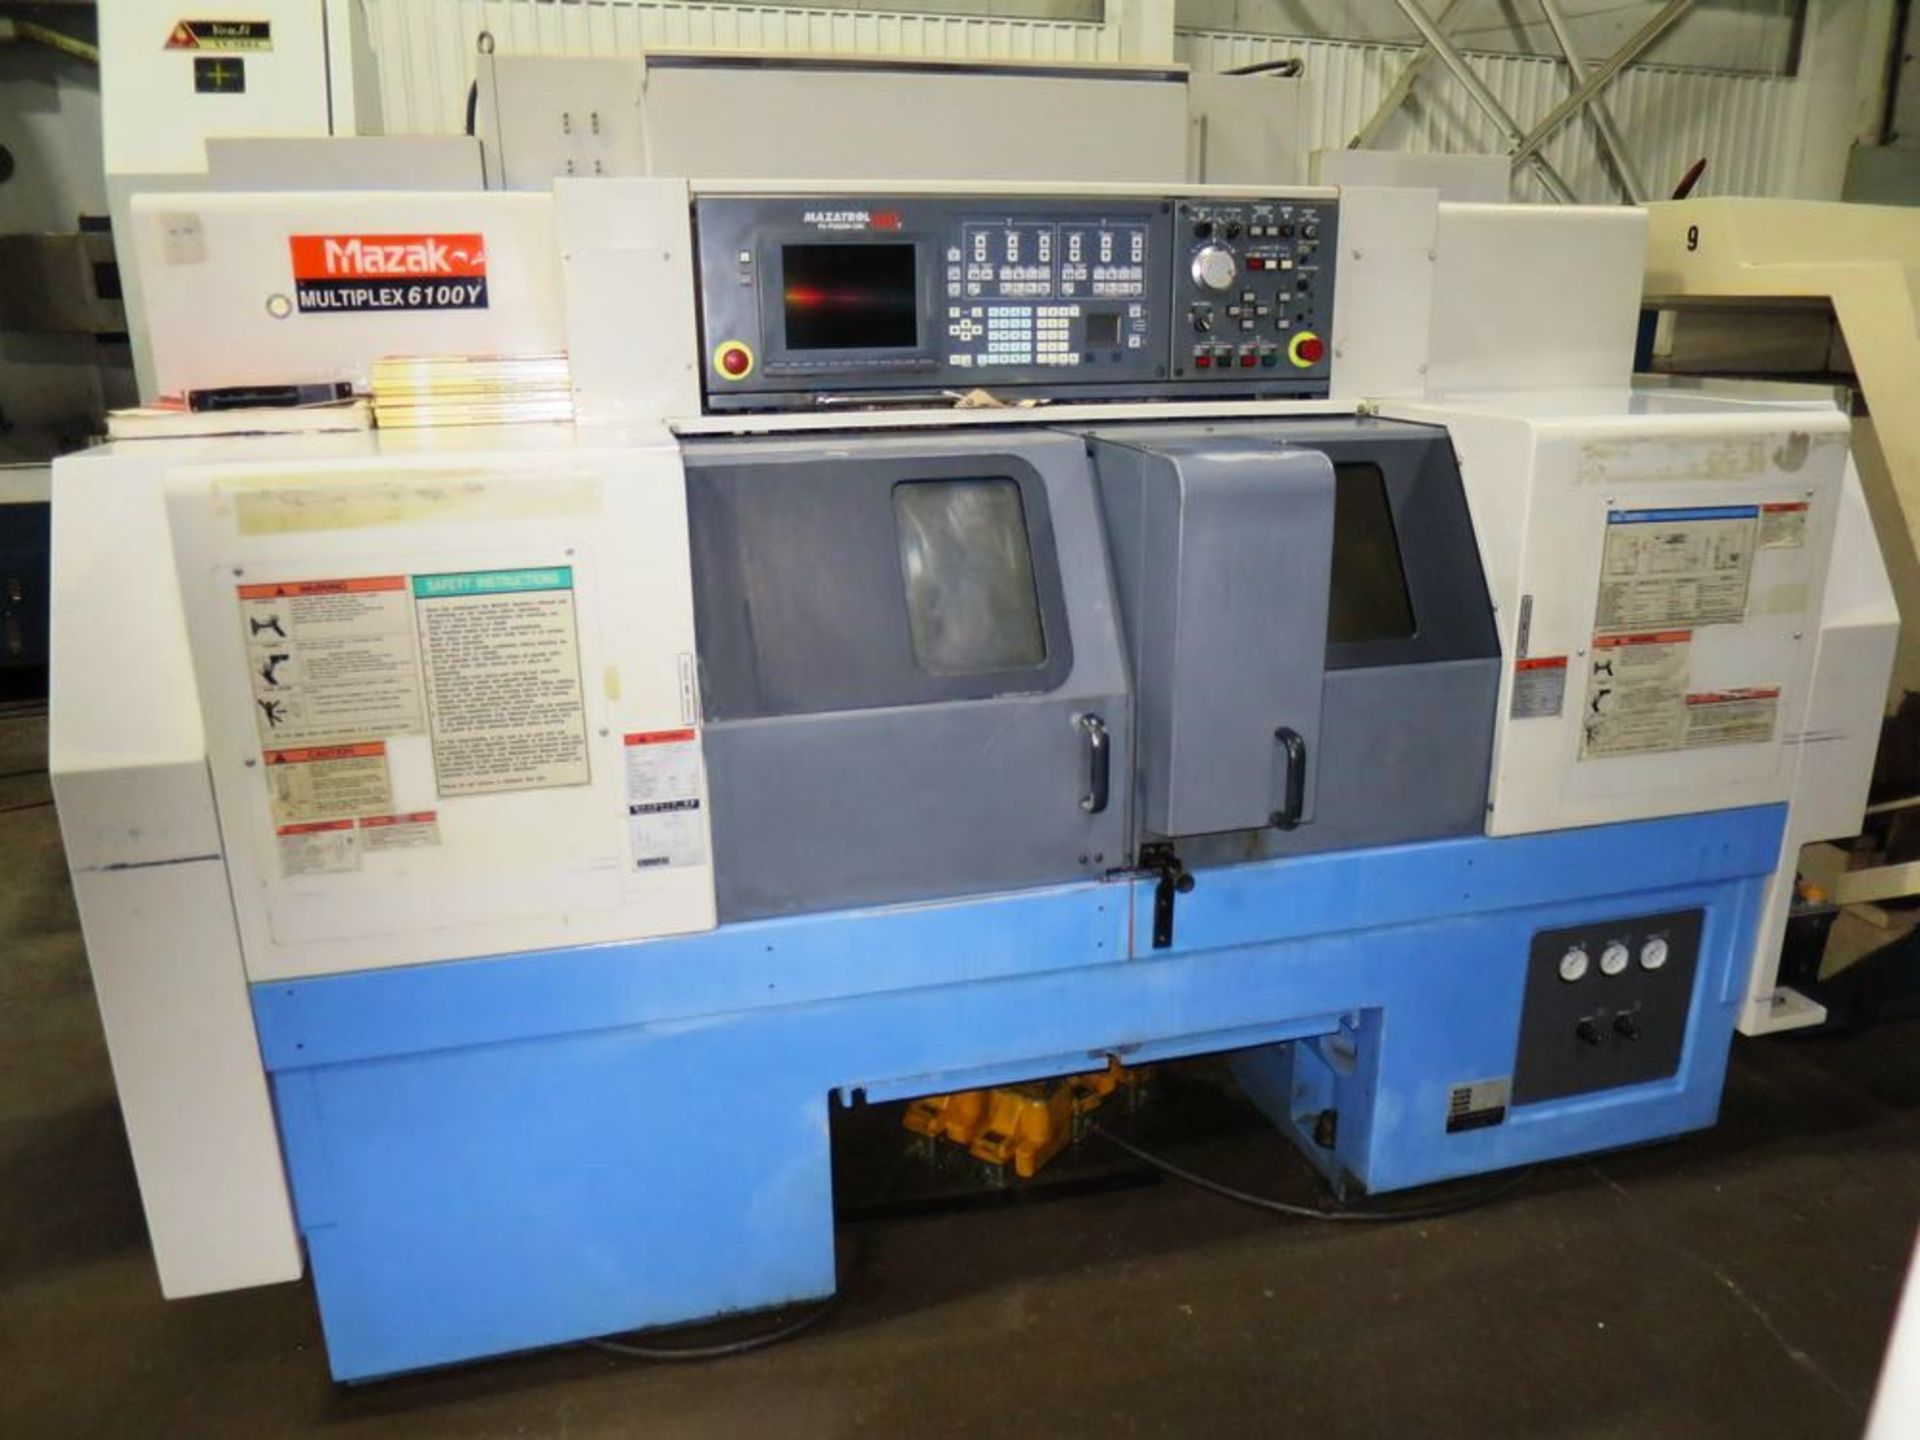 Mazak Multiplex 6100Y Multi-Axis Dual Spindle Turning Center, S/N 155400, New 2005 General